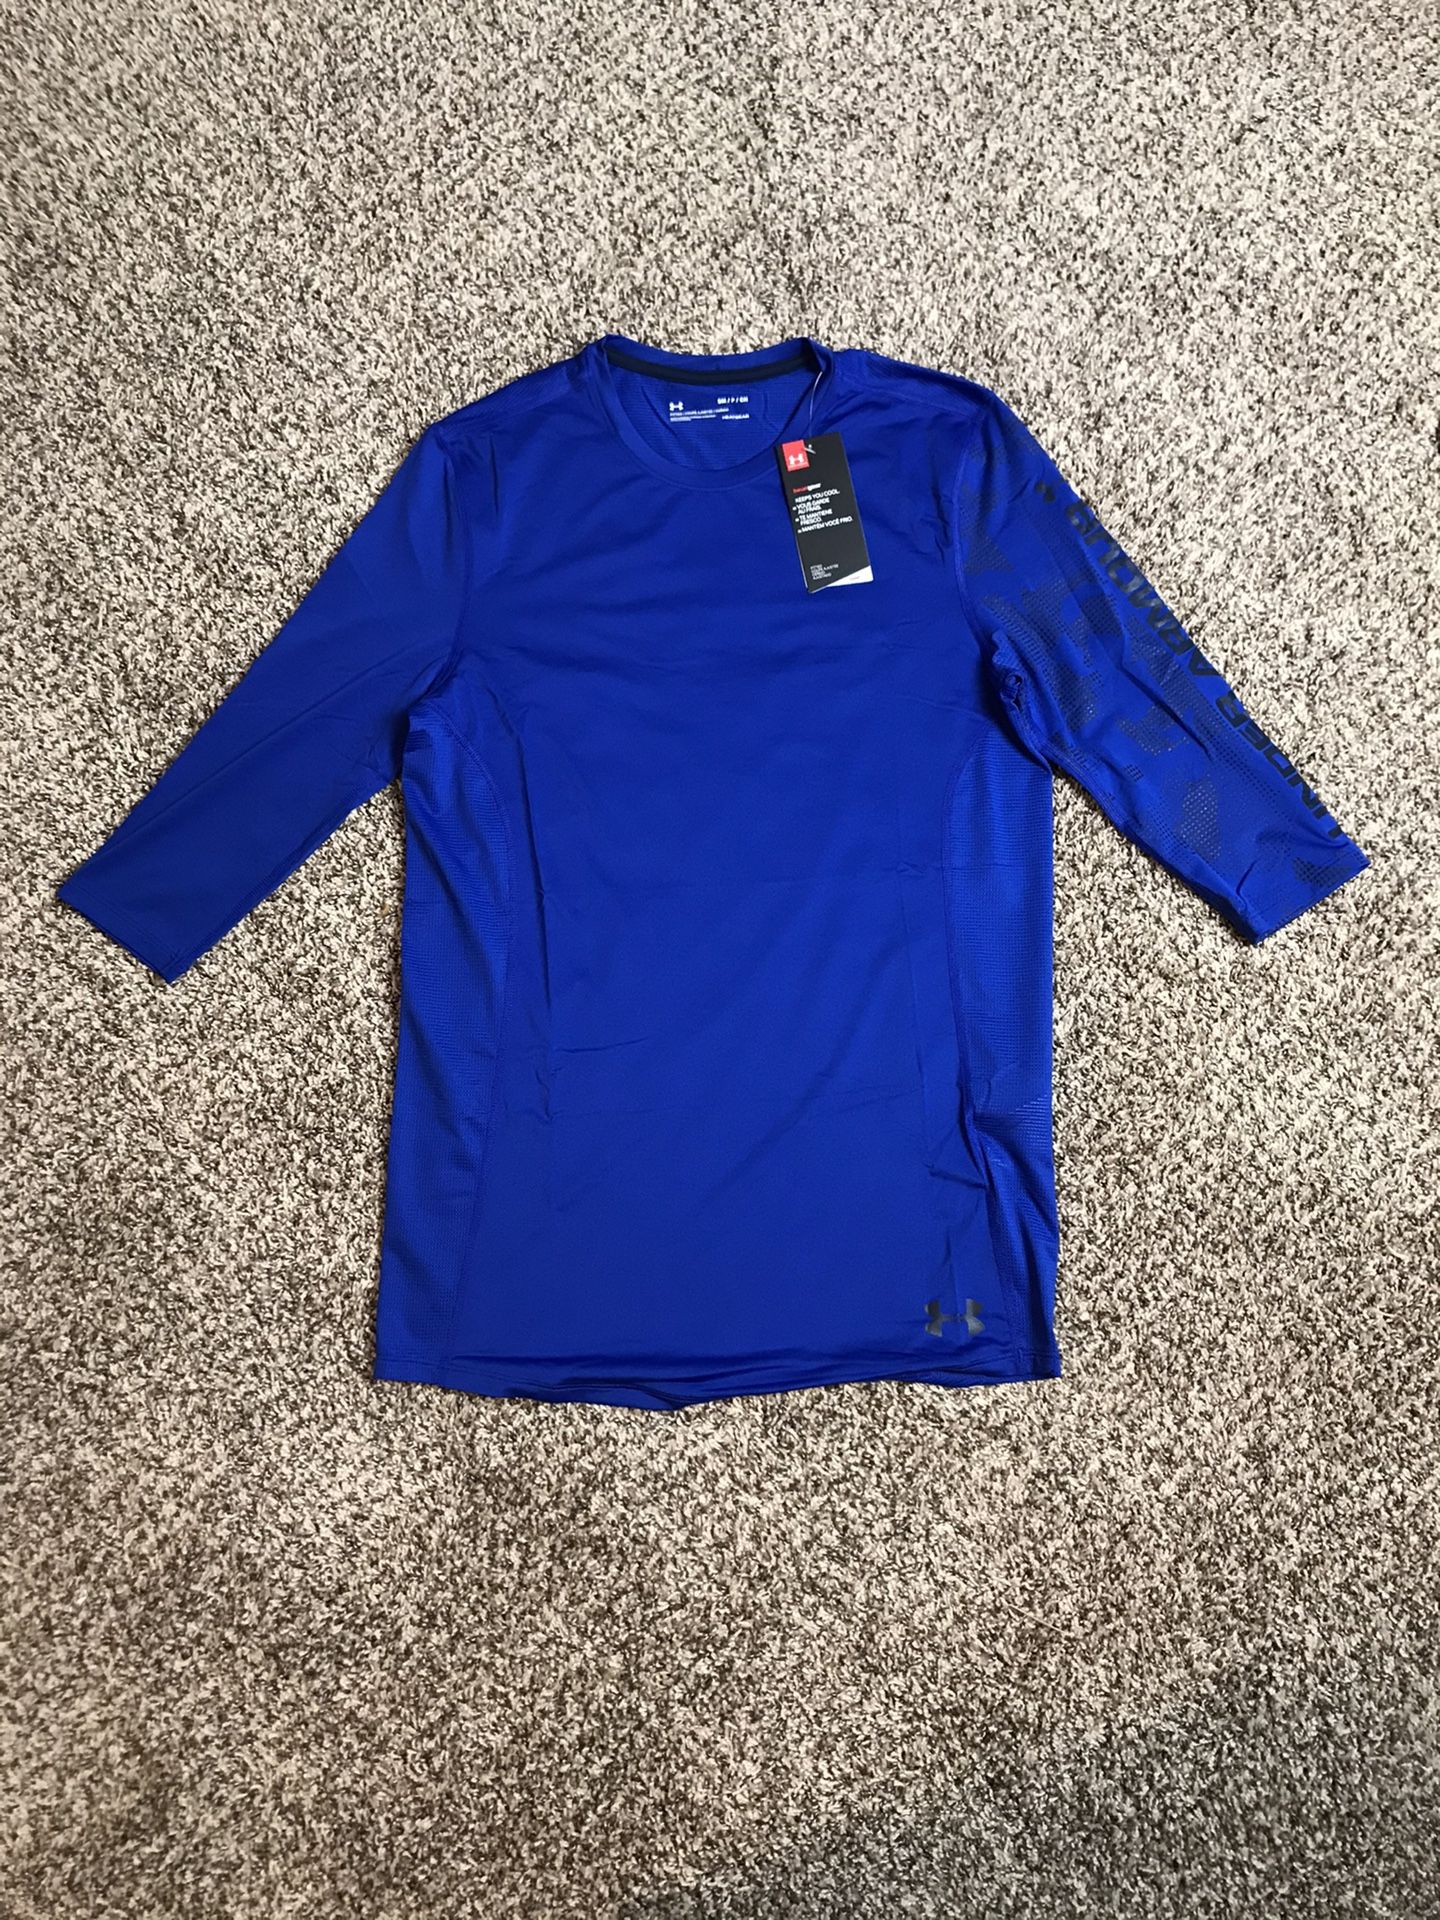 UNDER ARMOUR NWT Mens Size S Blue HeatGear 3/4 Sleeve Athletic Shirt New with tags